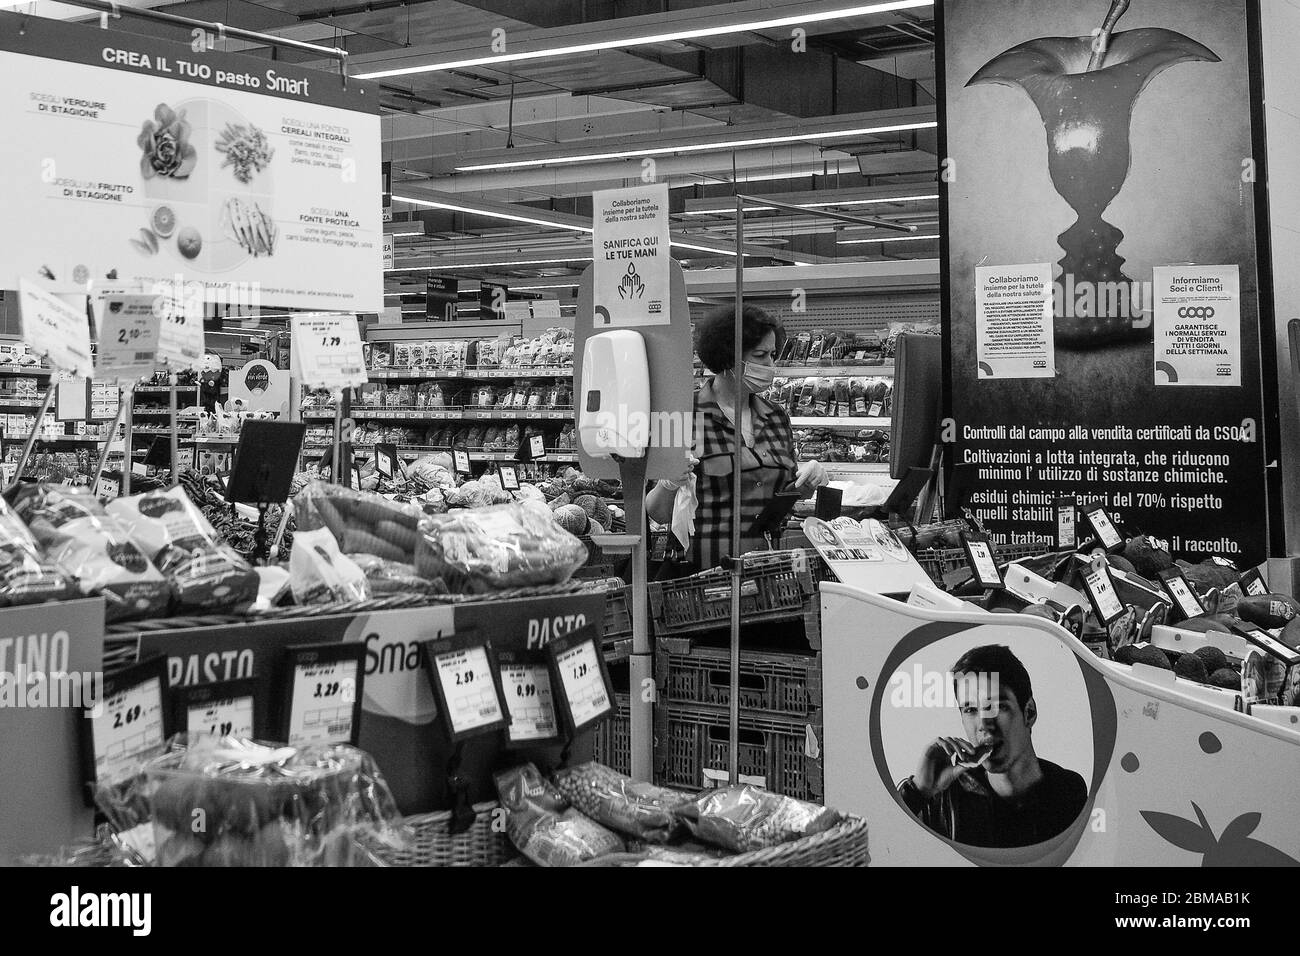 Cremona, Lombardy, Italy - May  5 6 7  2020 -people at the supermarket for grocery shopping during outbreak phase 2 and economic crisis Stock Photo